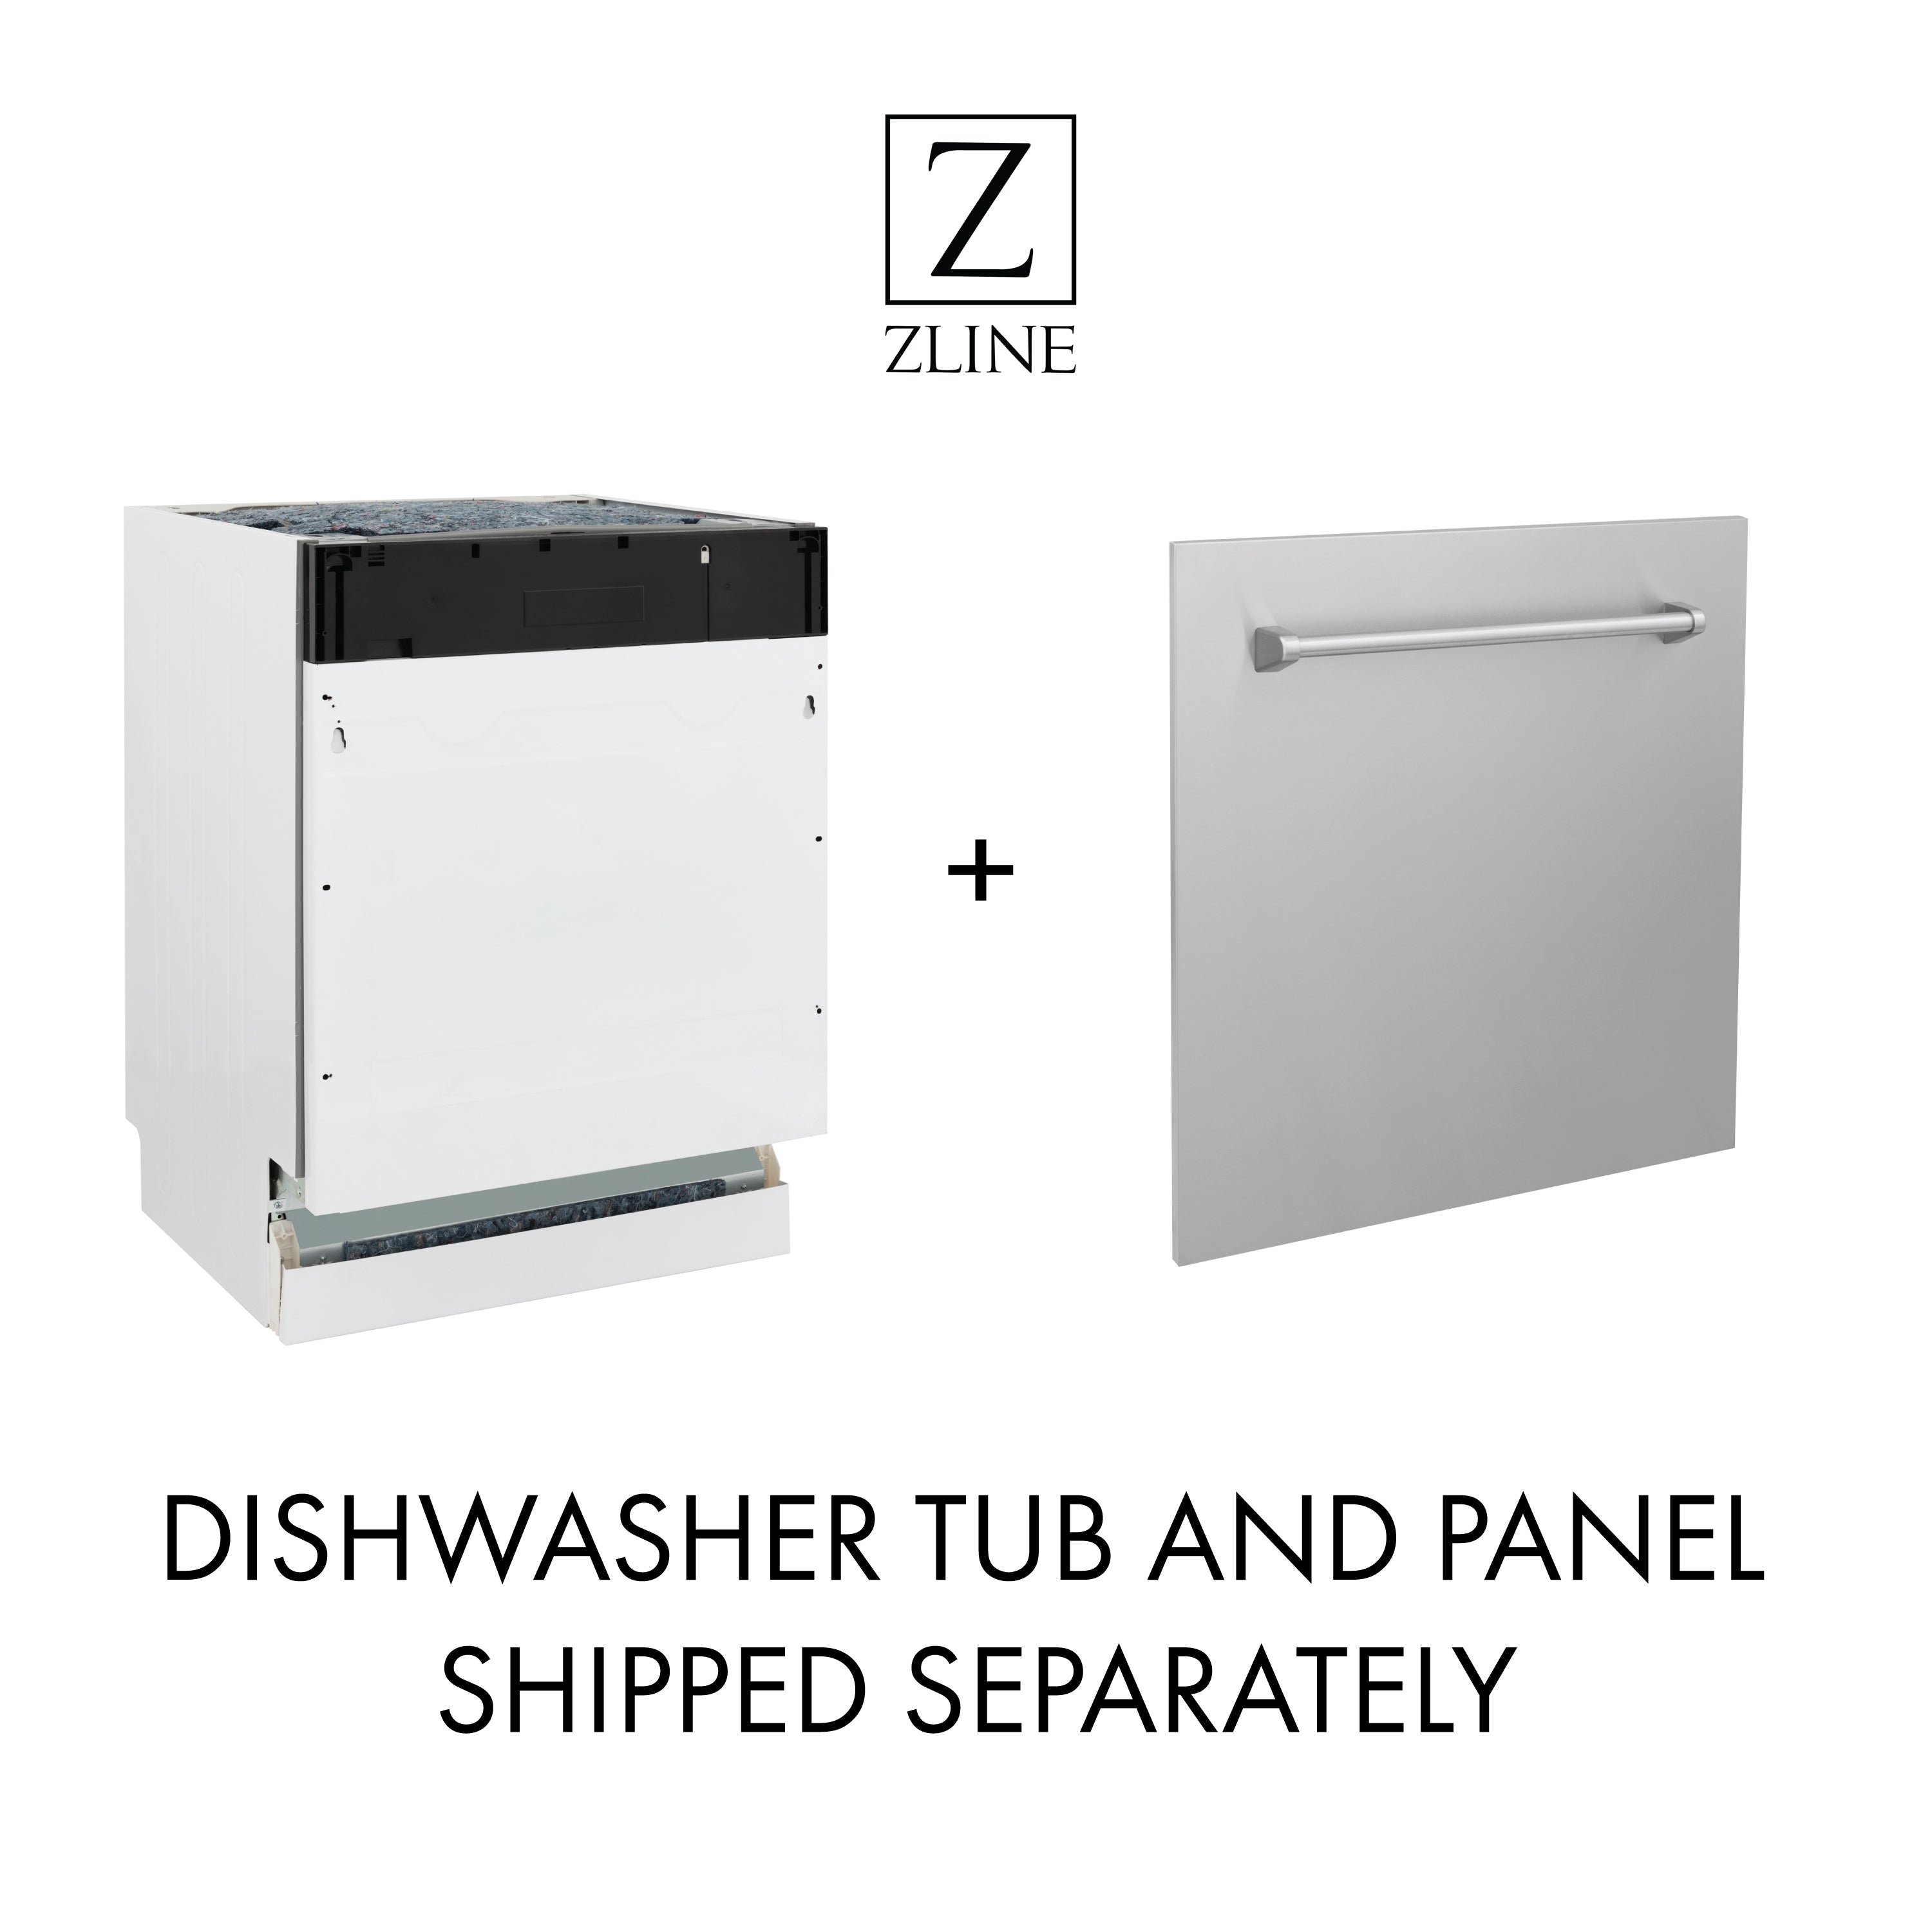 ZLINE Autograph Edition 18 in. Tallac Series 3rd Rack Top Control Built-In Dishwasher in Black Stainless Steel with Polished Gold Handle, 51dBa (DWVZ-BS-18-G)